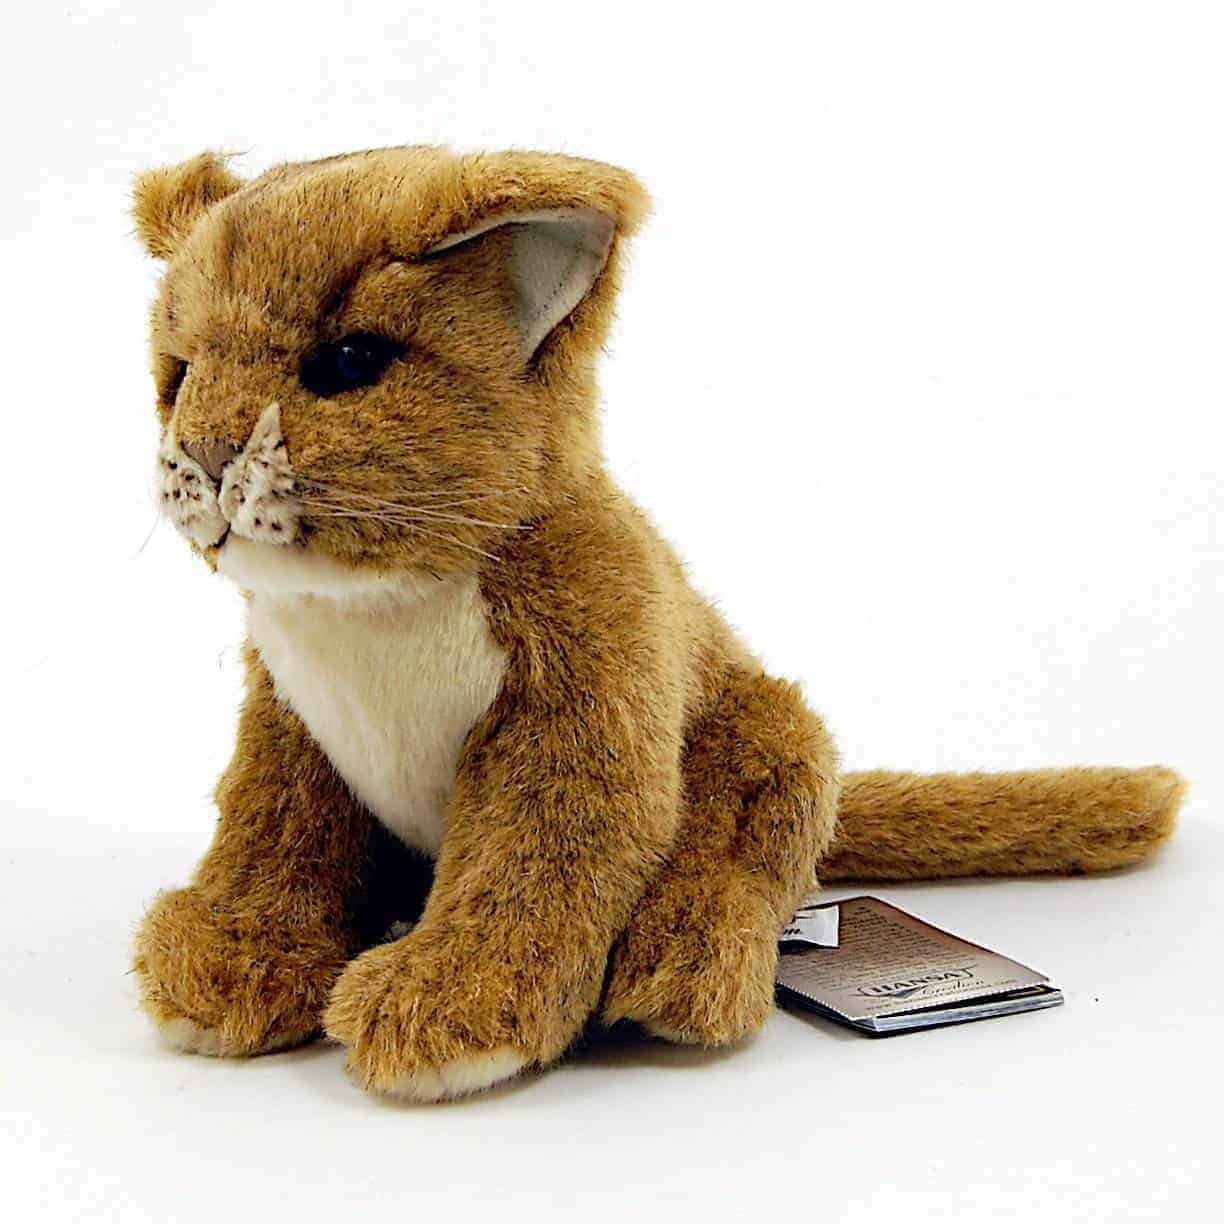 This Lion Cub Brown 6.5" by Hansa True to Life Look Soft Plush Animal Learning Toys is made with love by Premier Homegoods! Shop more unique gift ideas today with Spots Initiatives, the best way to support creators.